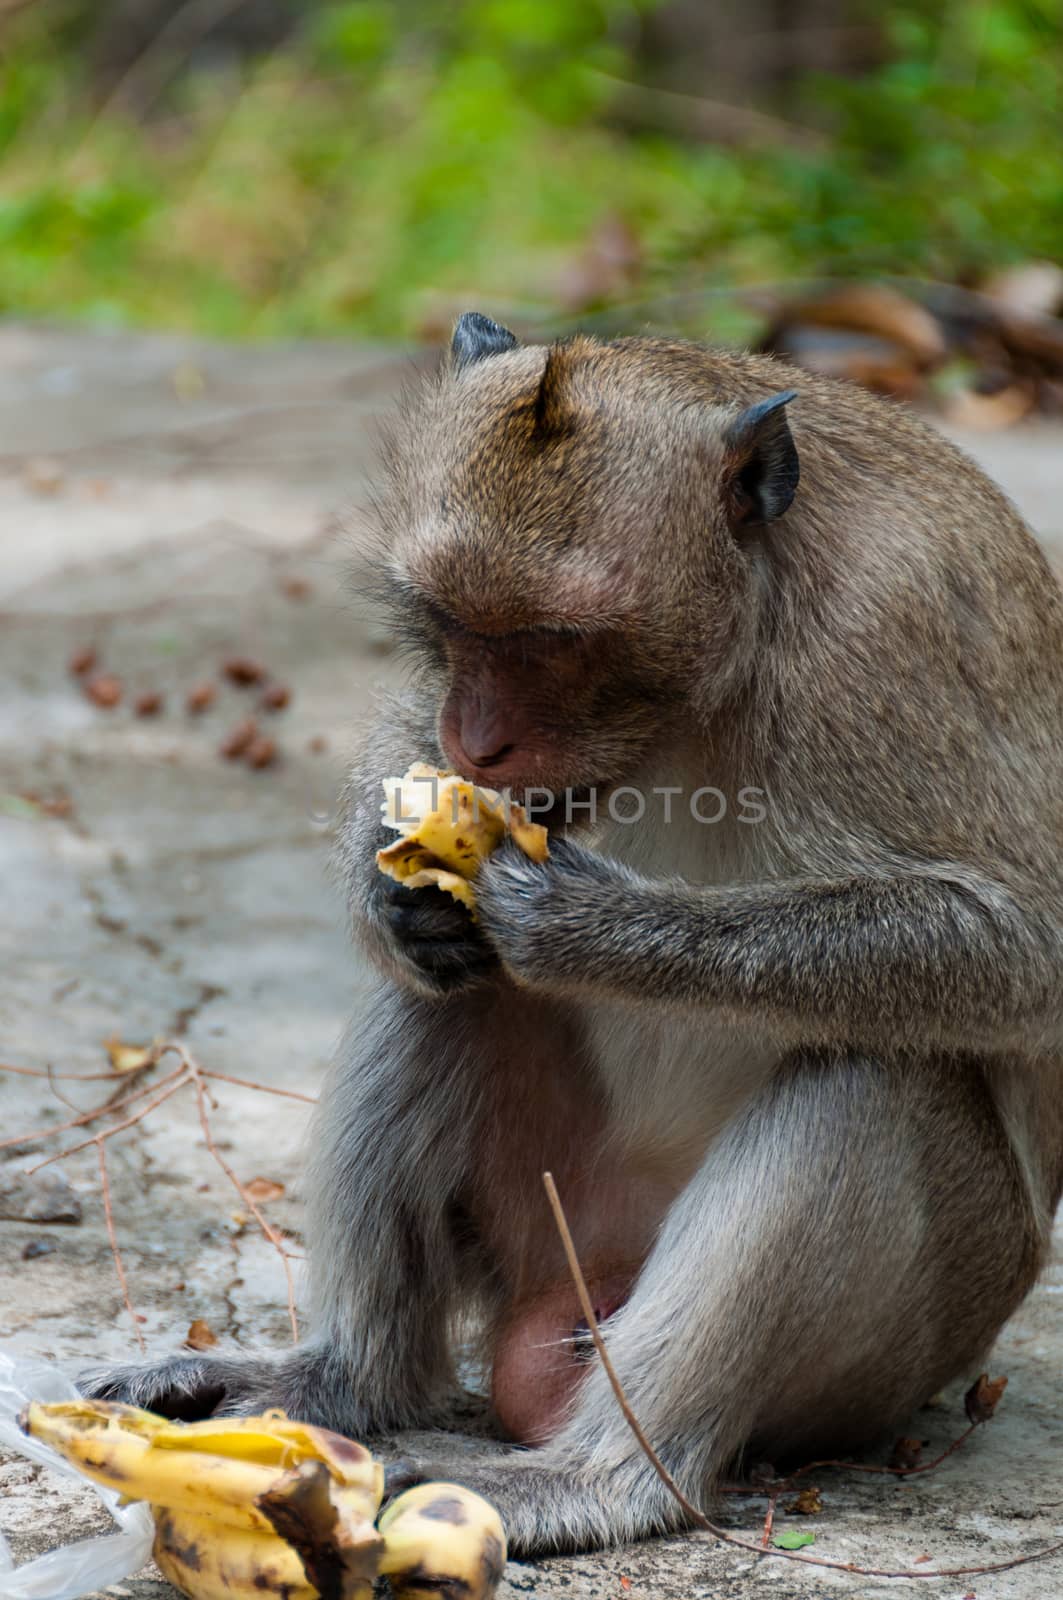 Monkey Rhesus Macaque sitting and eating a banana seen in cambodia Asia